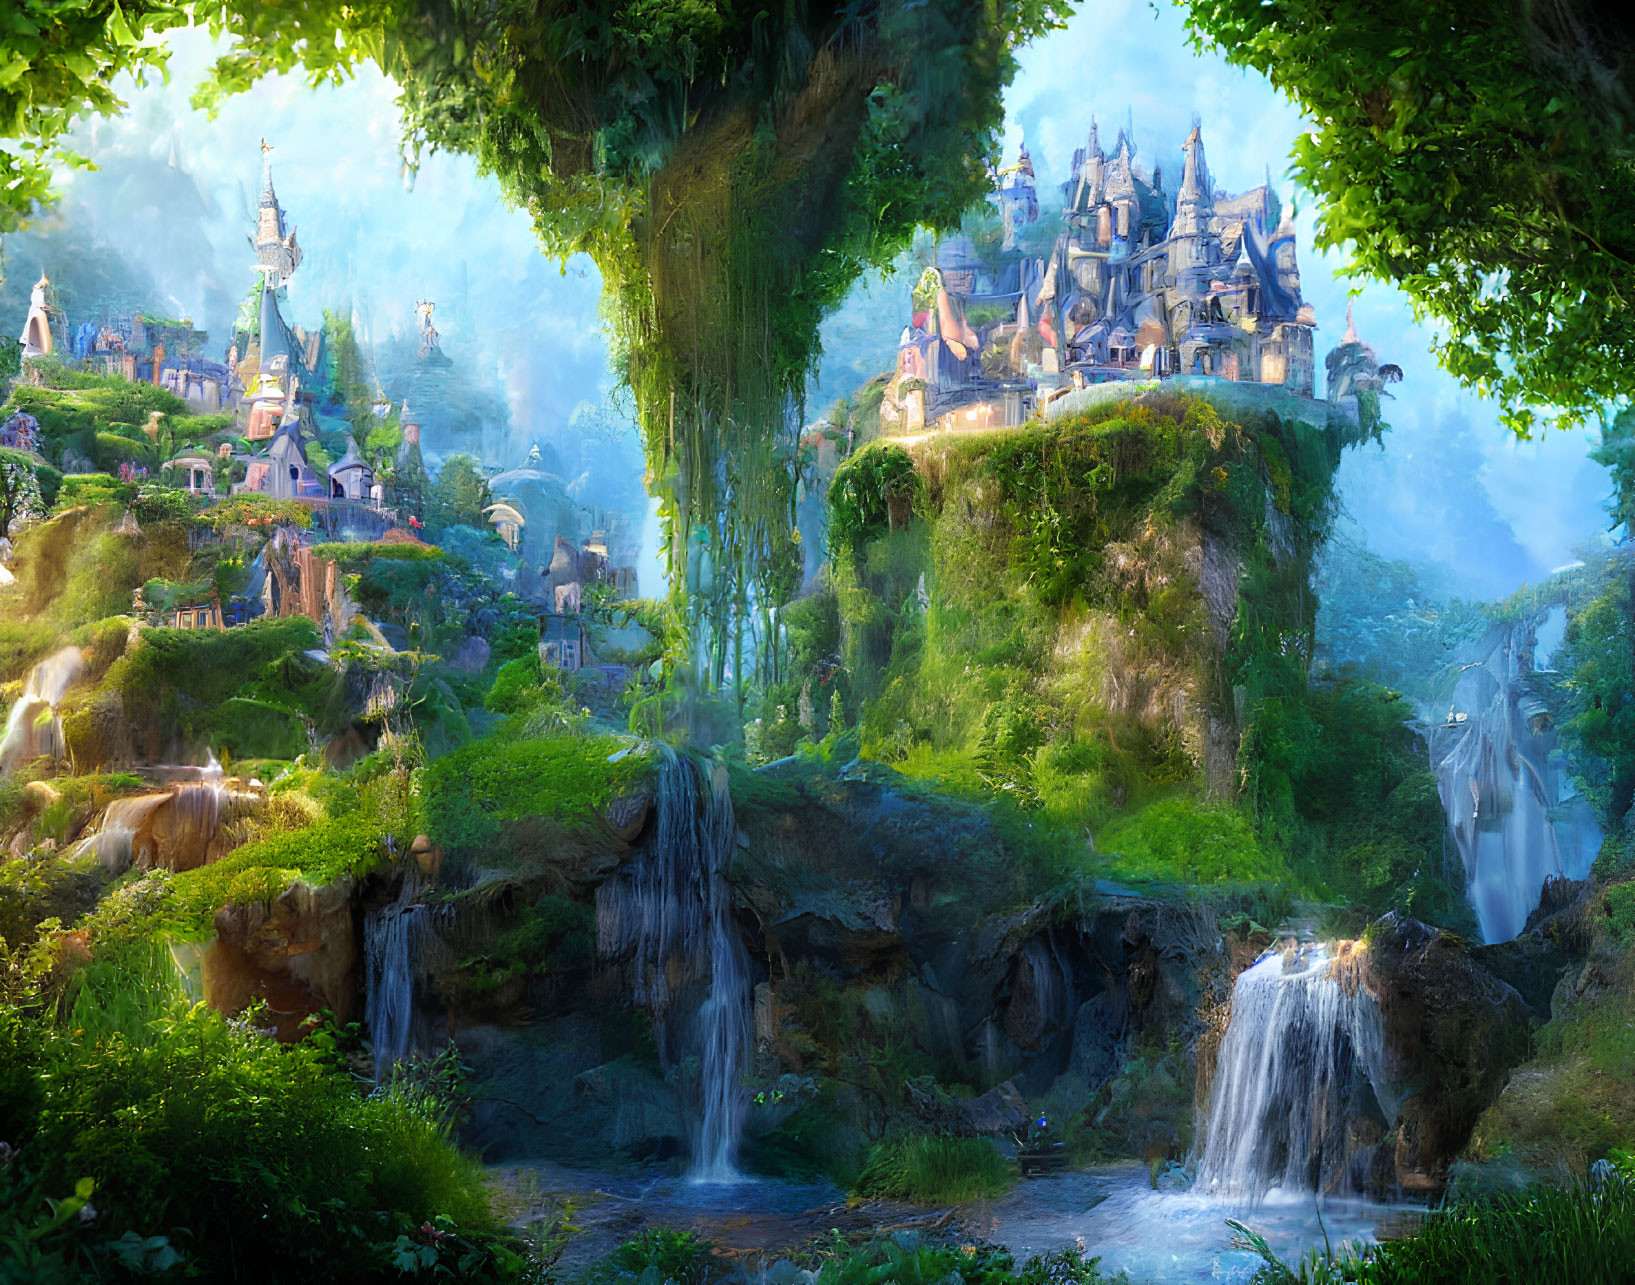 Fantastical landscape with waterfall, greenery, and castle on cliff